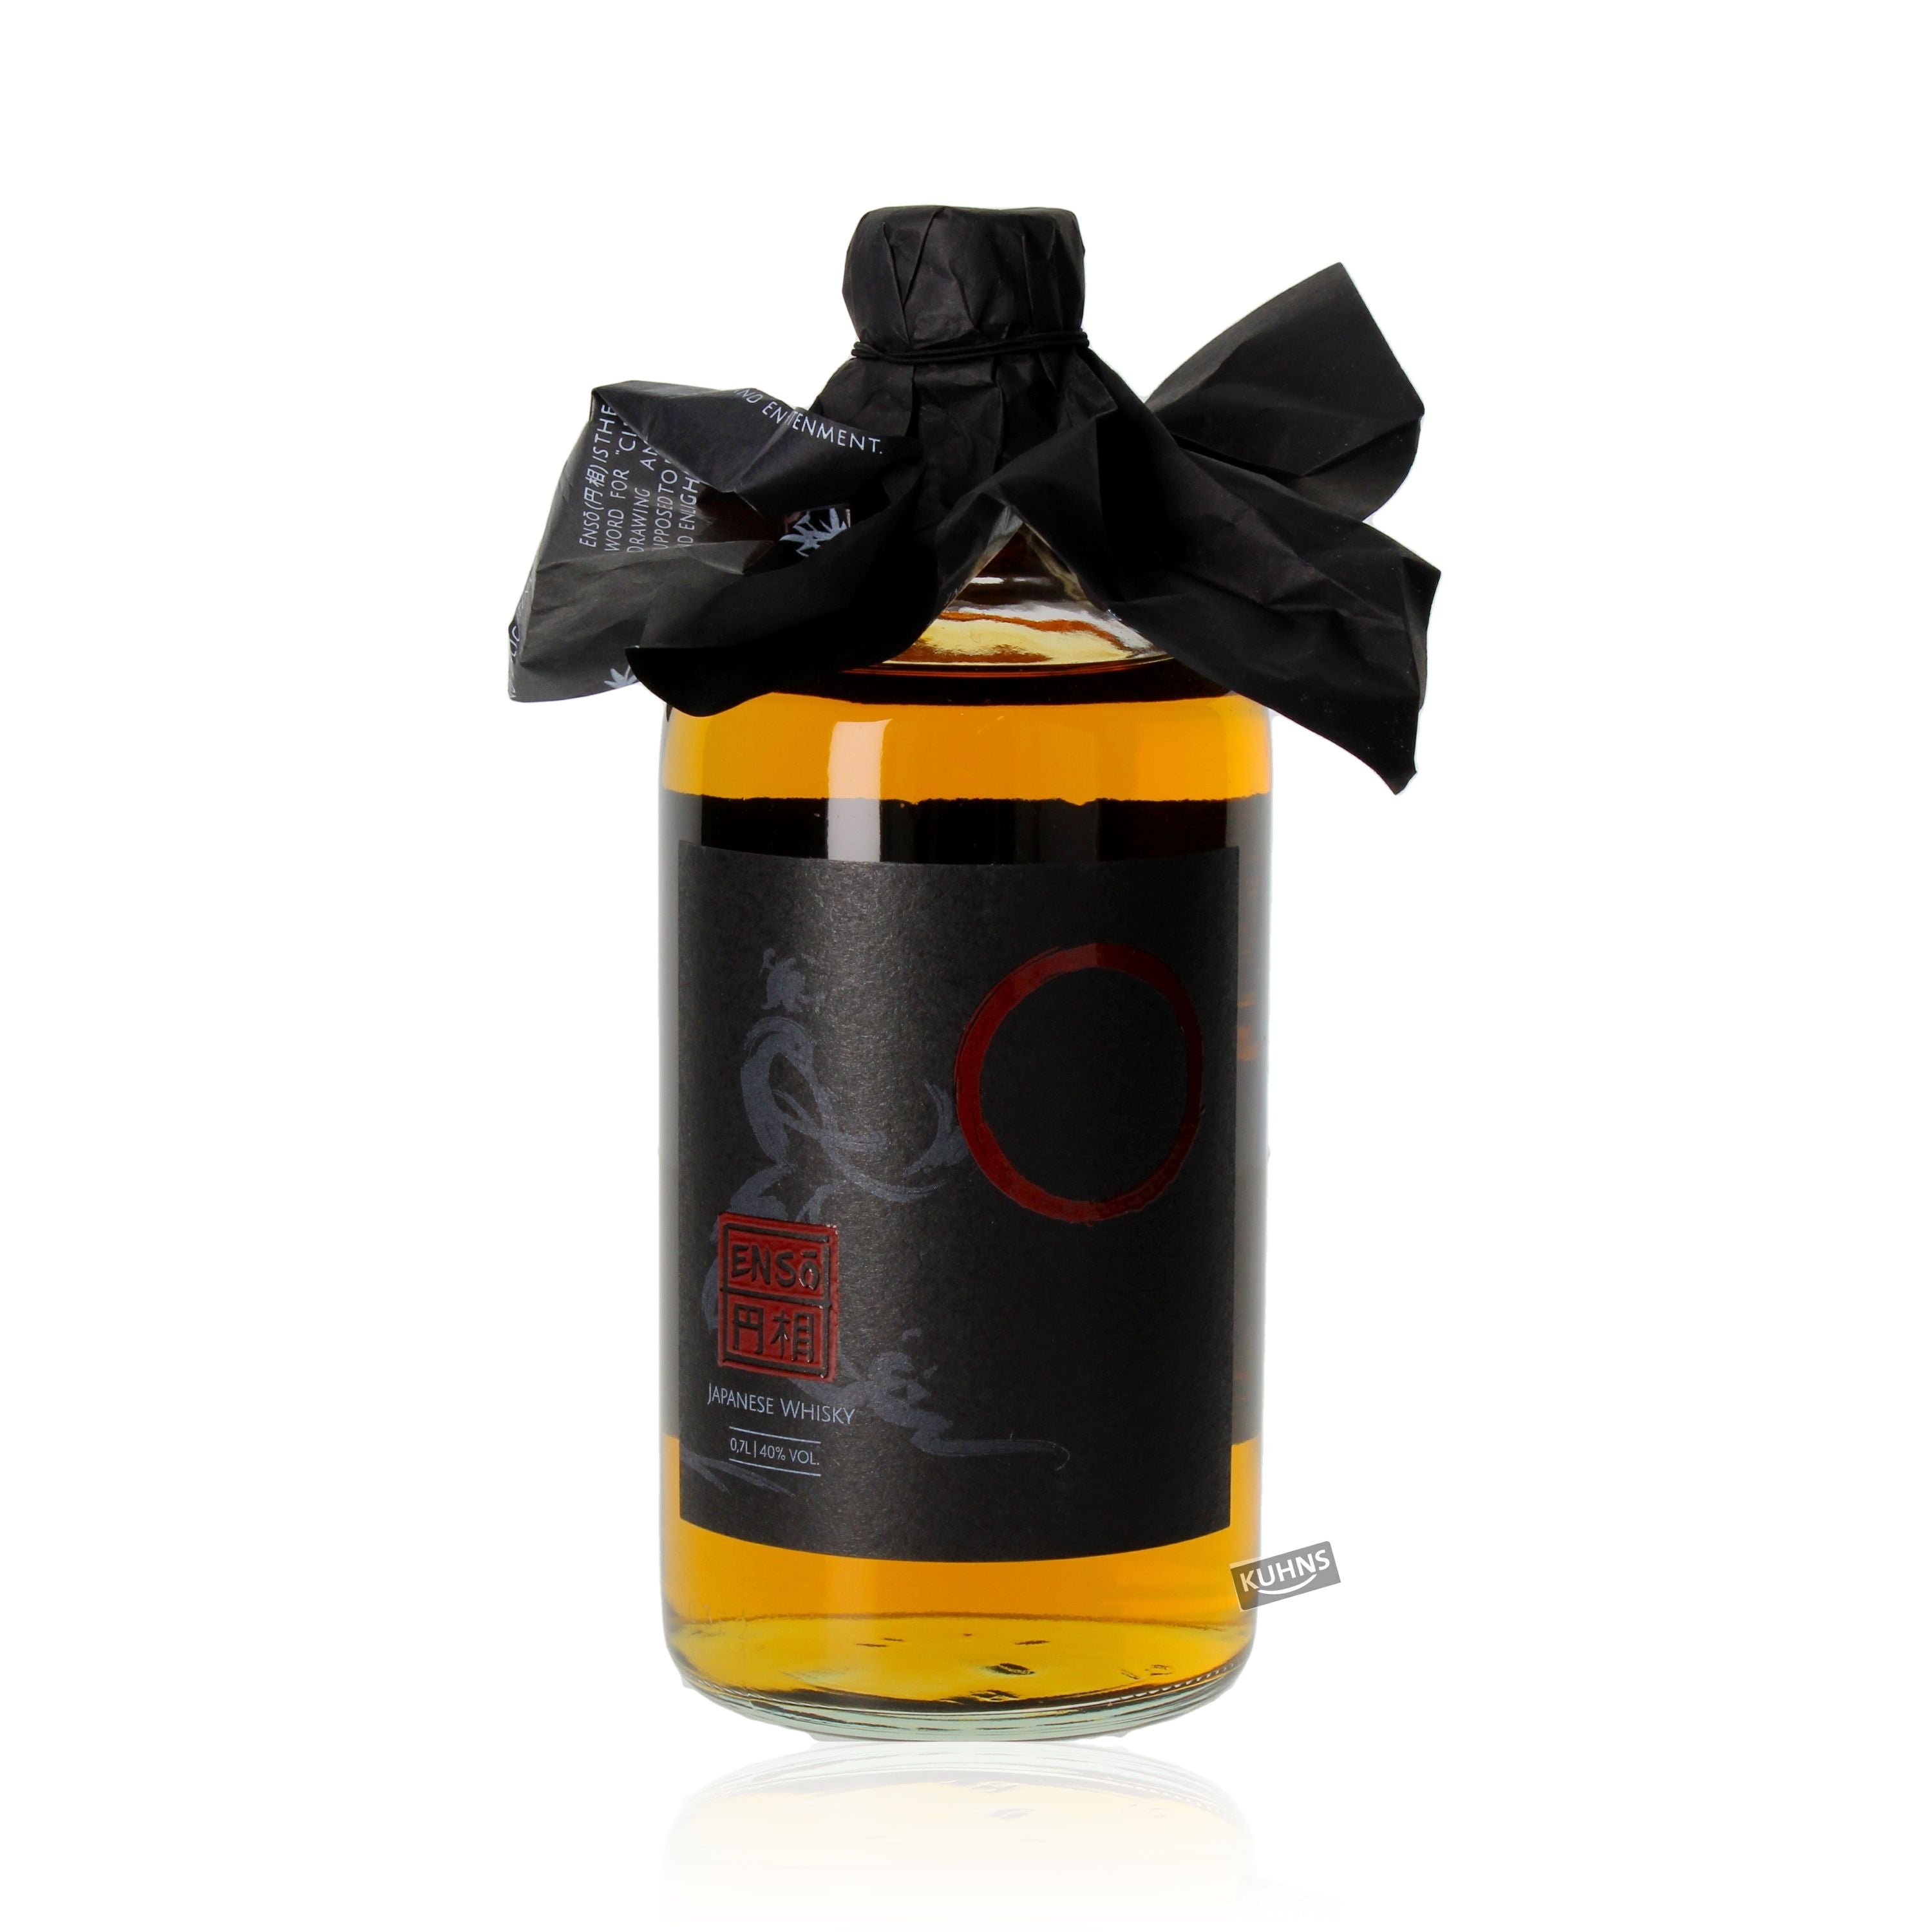 Enso Japanese Blended Whiskey 0.7l, alc. 40% by volume